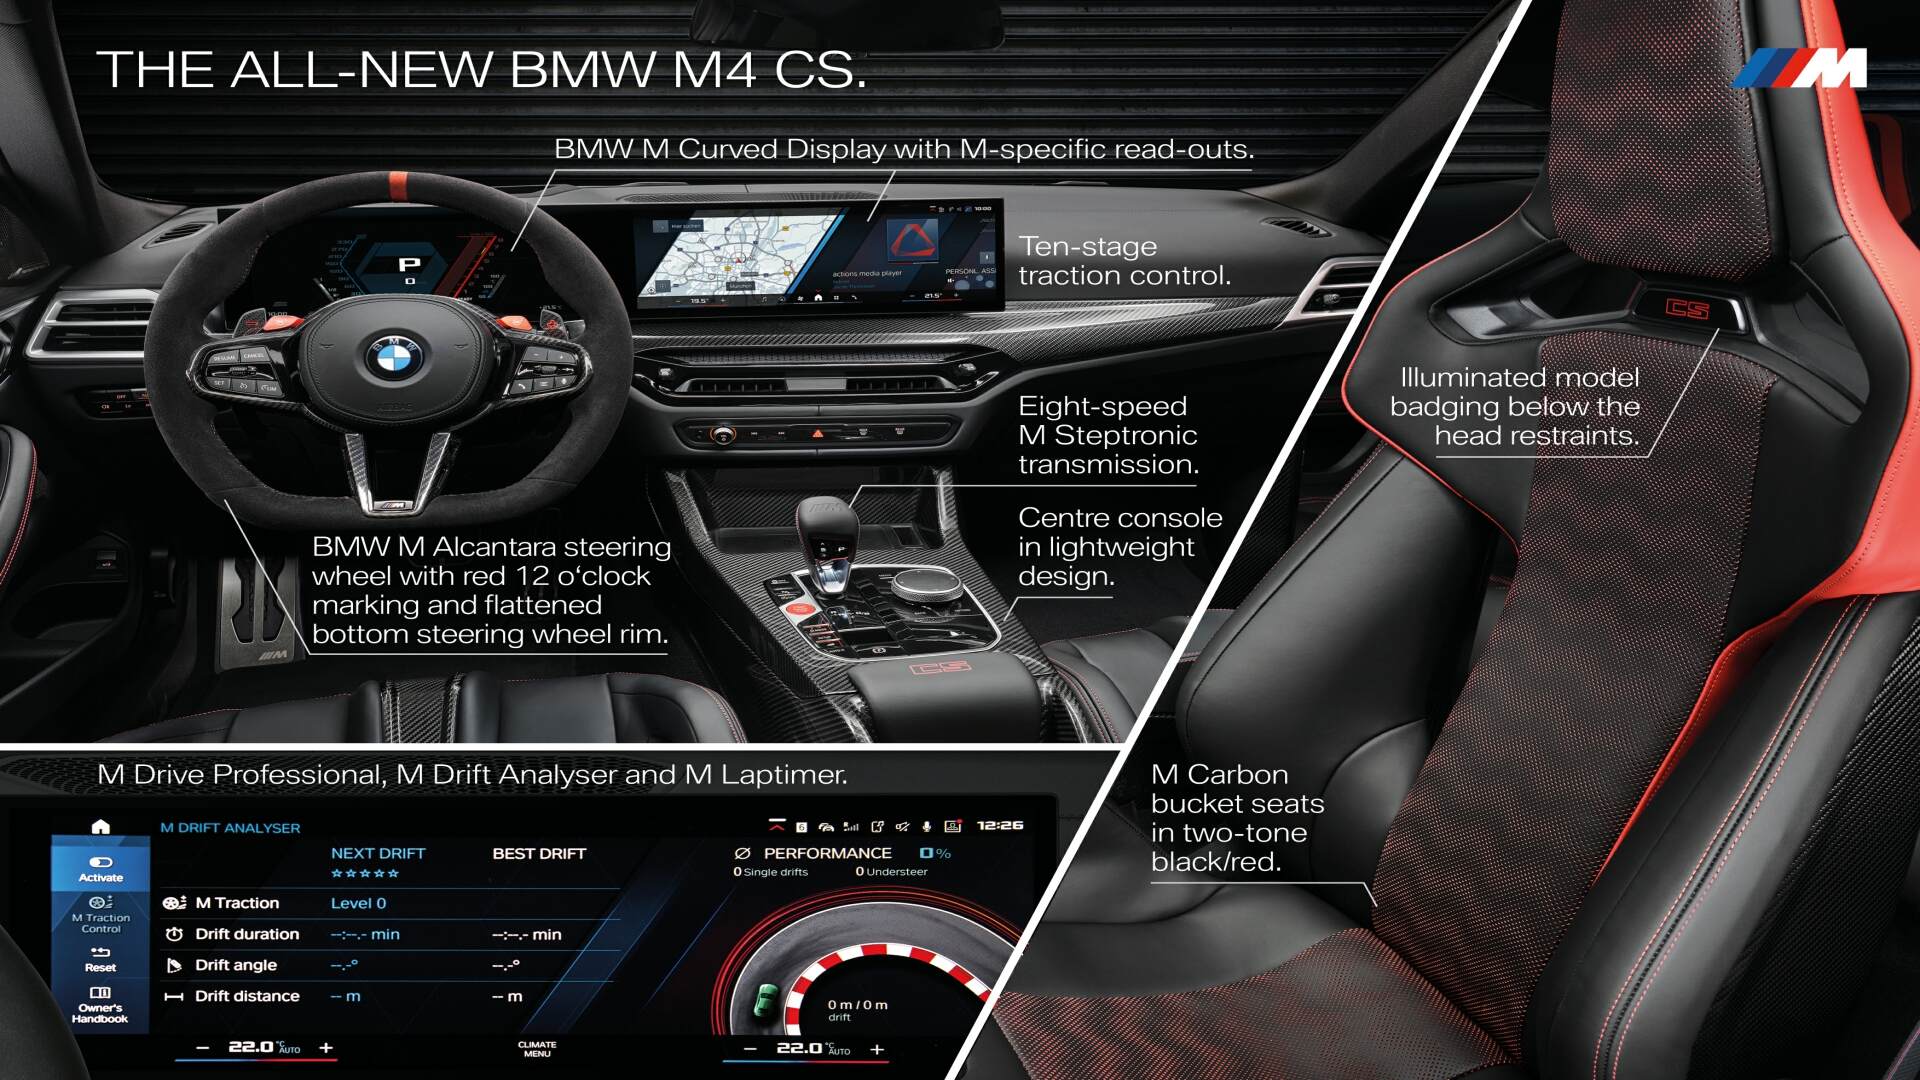 The Full Specifications Listed Of The Interior Of A BMW M4 CS